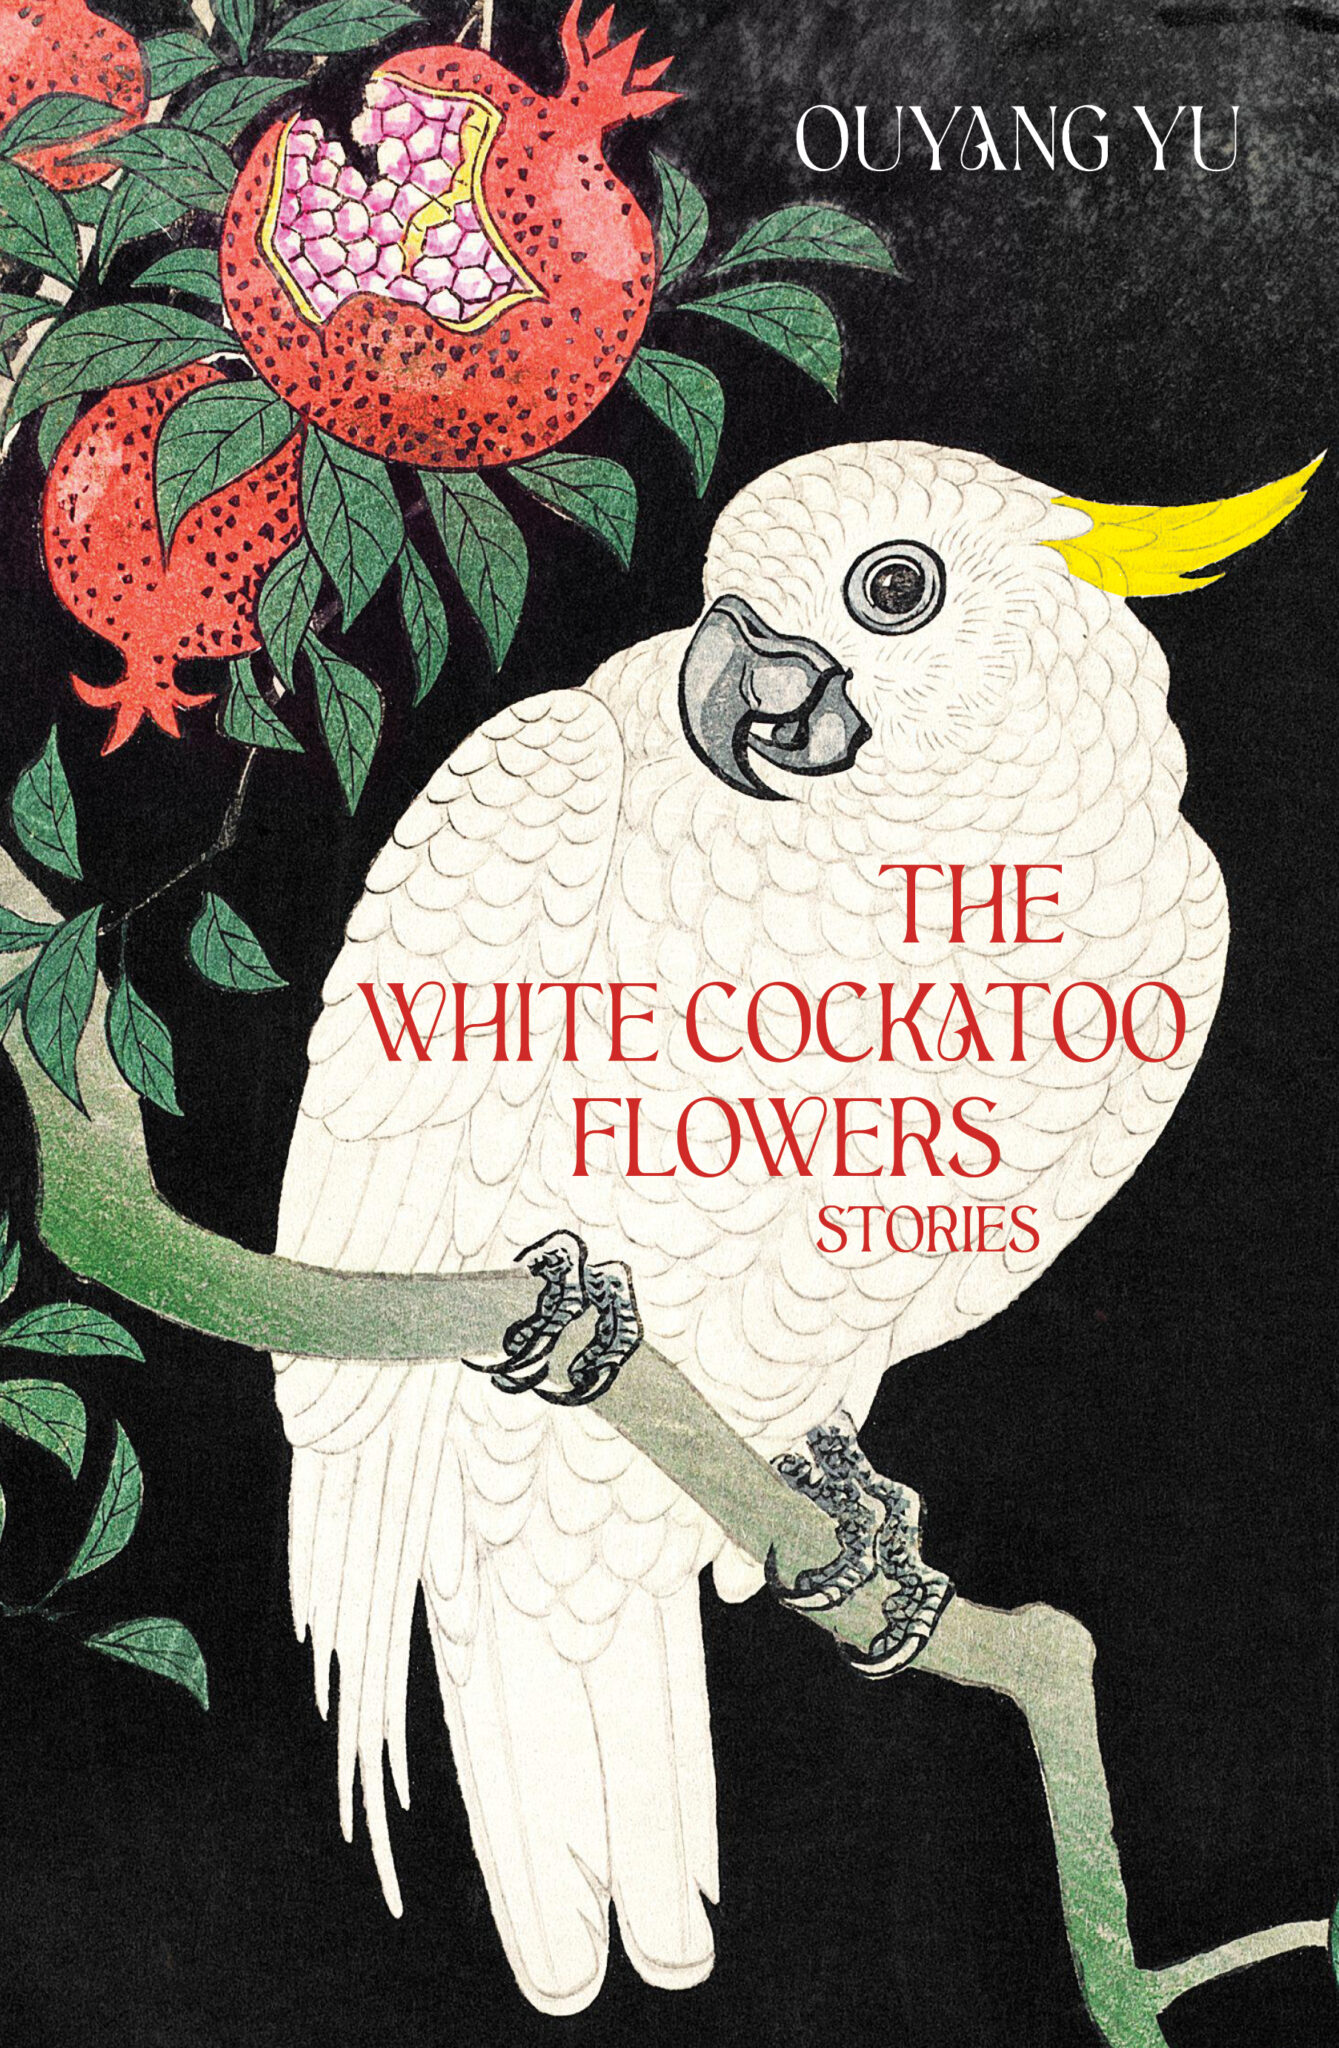 A book cover showing an illustration of a yellow-crested cockatoo perched on a branch with red fruit in the top left corner